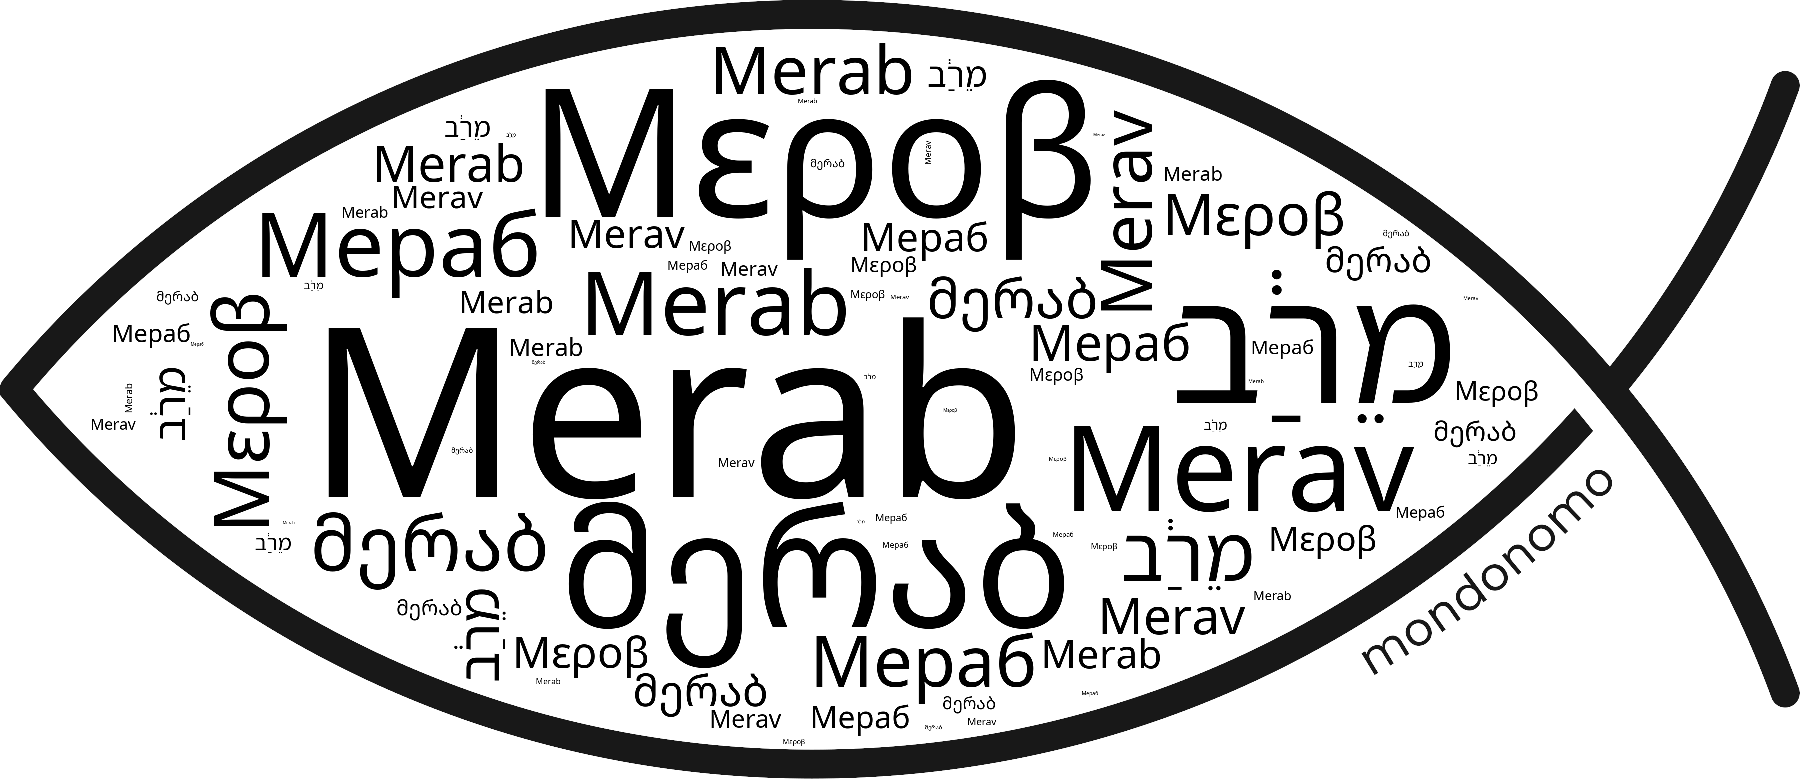 Name Merab in the world's Bibles